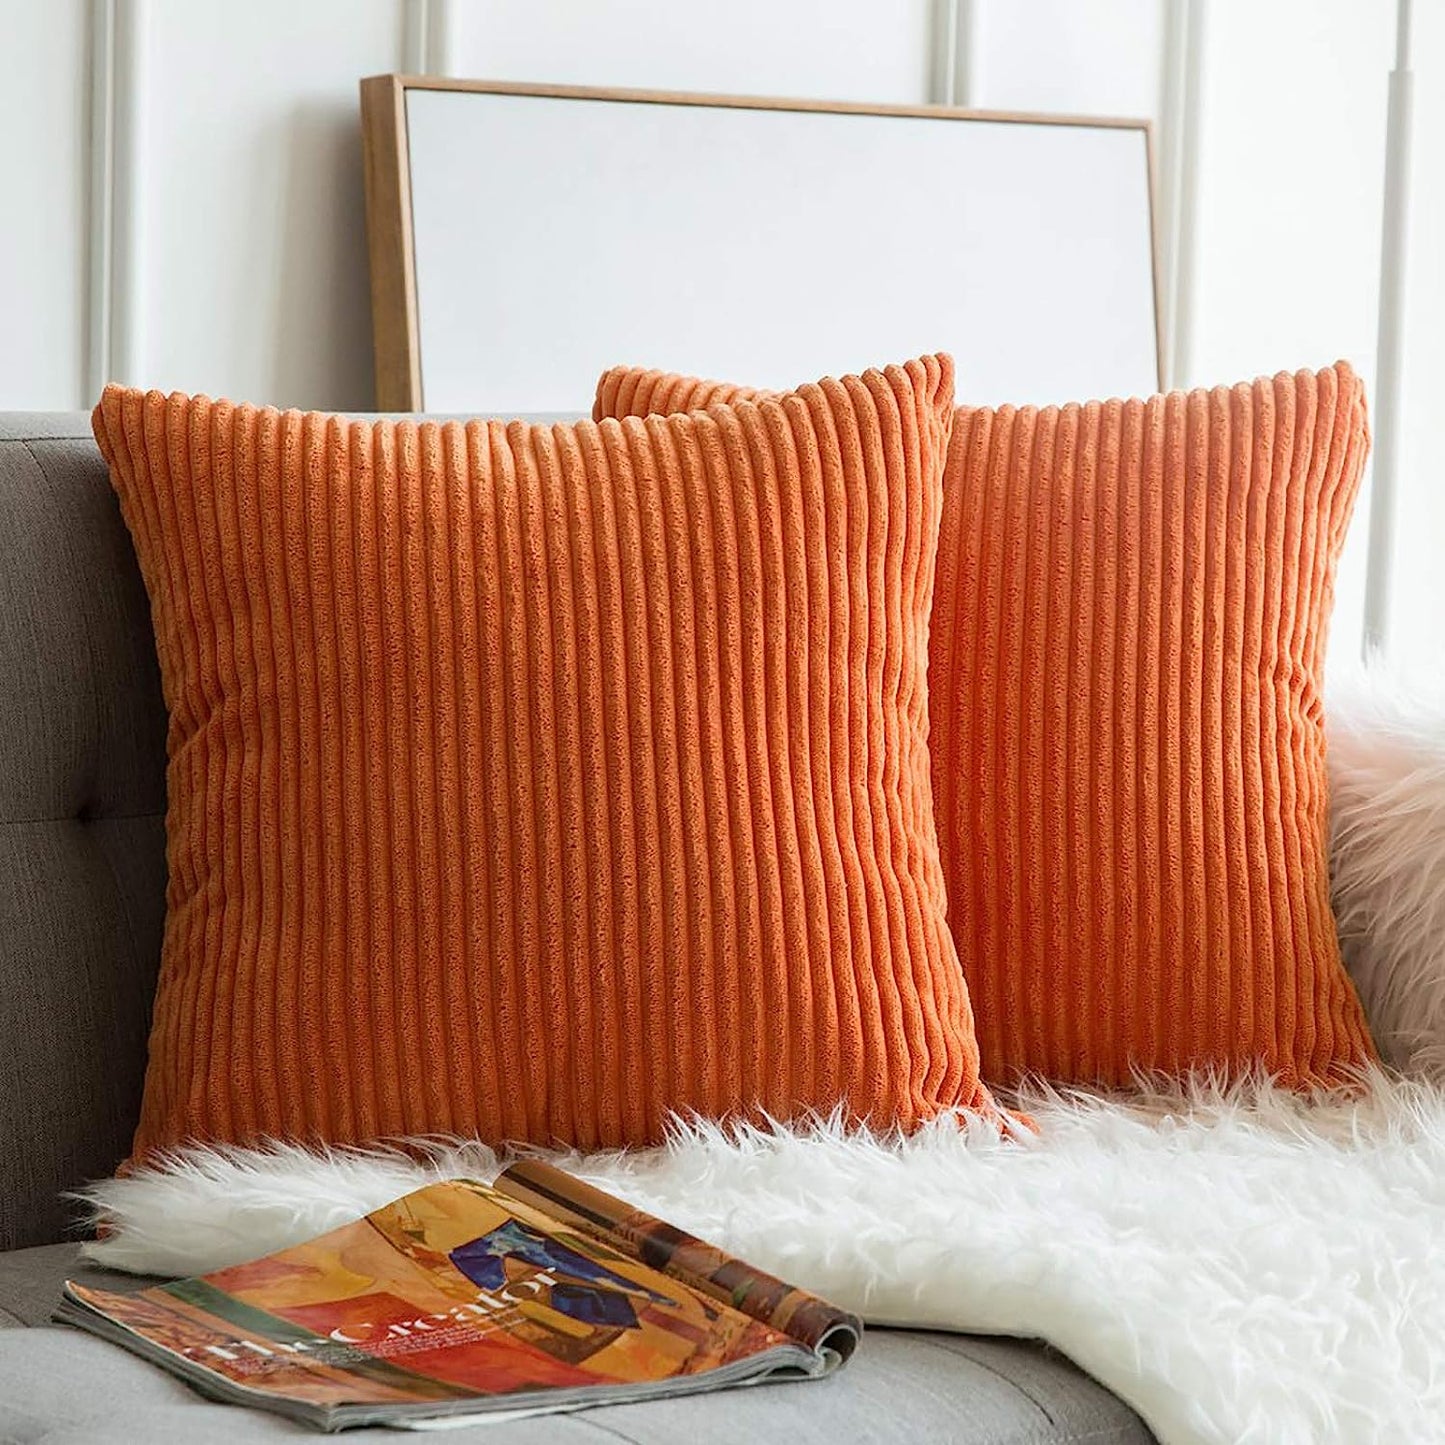 Pack of 2 Orange Pillow Covers 18X18 Inch Soft Boho Striped Corduroy Throw Pillow Covers Set Decorative Square Cushion Cases Pillowcases for Sofa Bedroom Couch